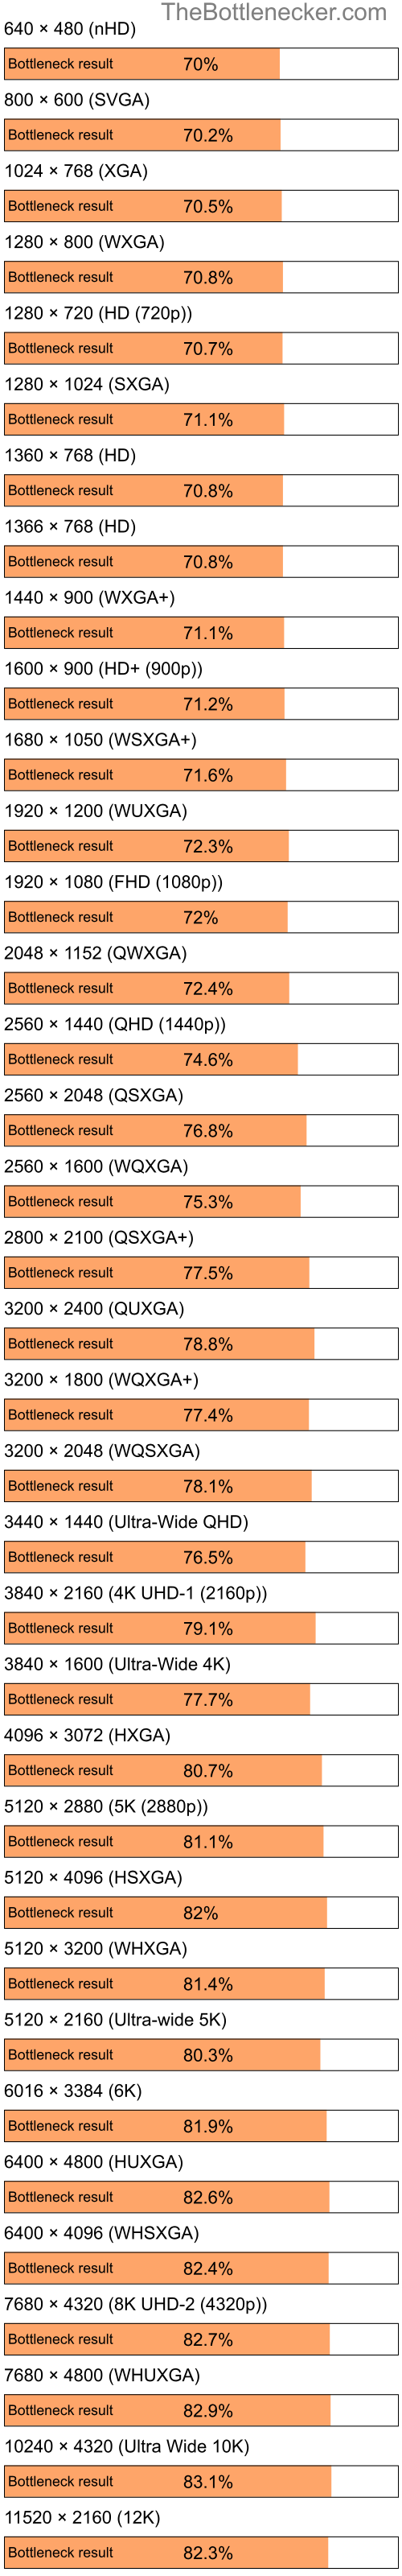 Bottleneck results by resolution for Intel Atom N280 and AMD Radeon 3100 in7 Days to Die